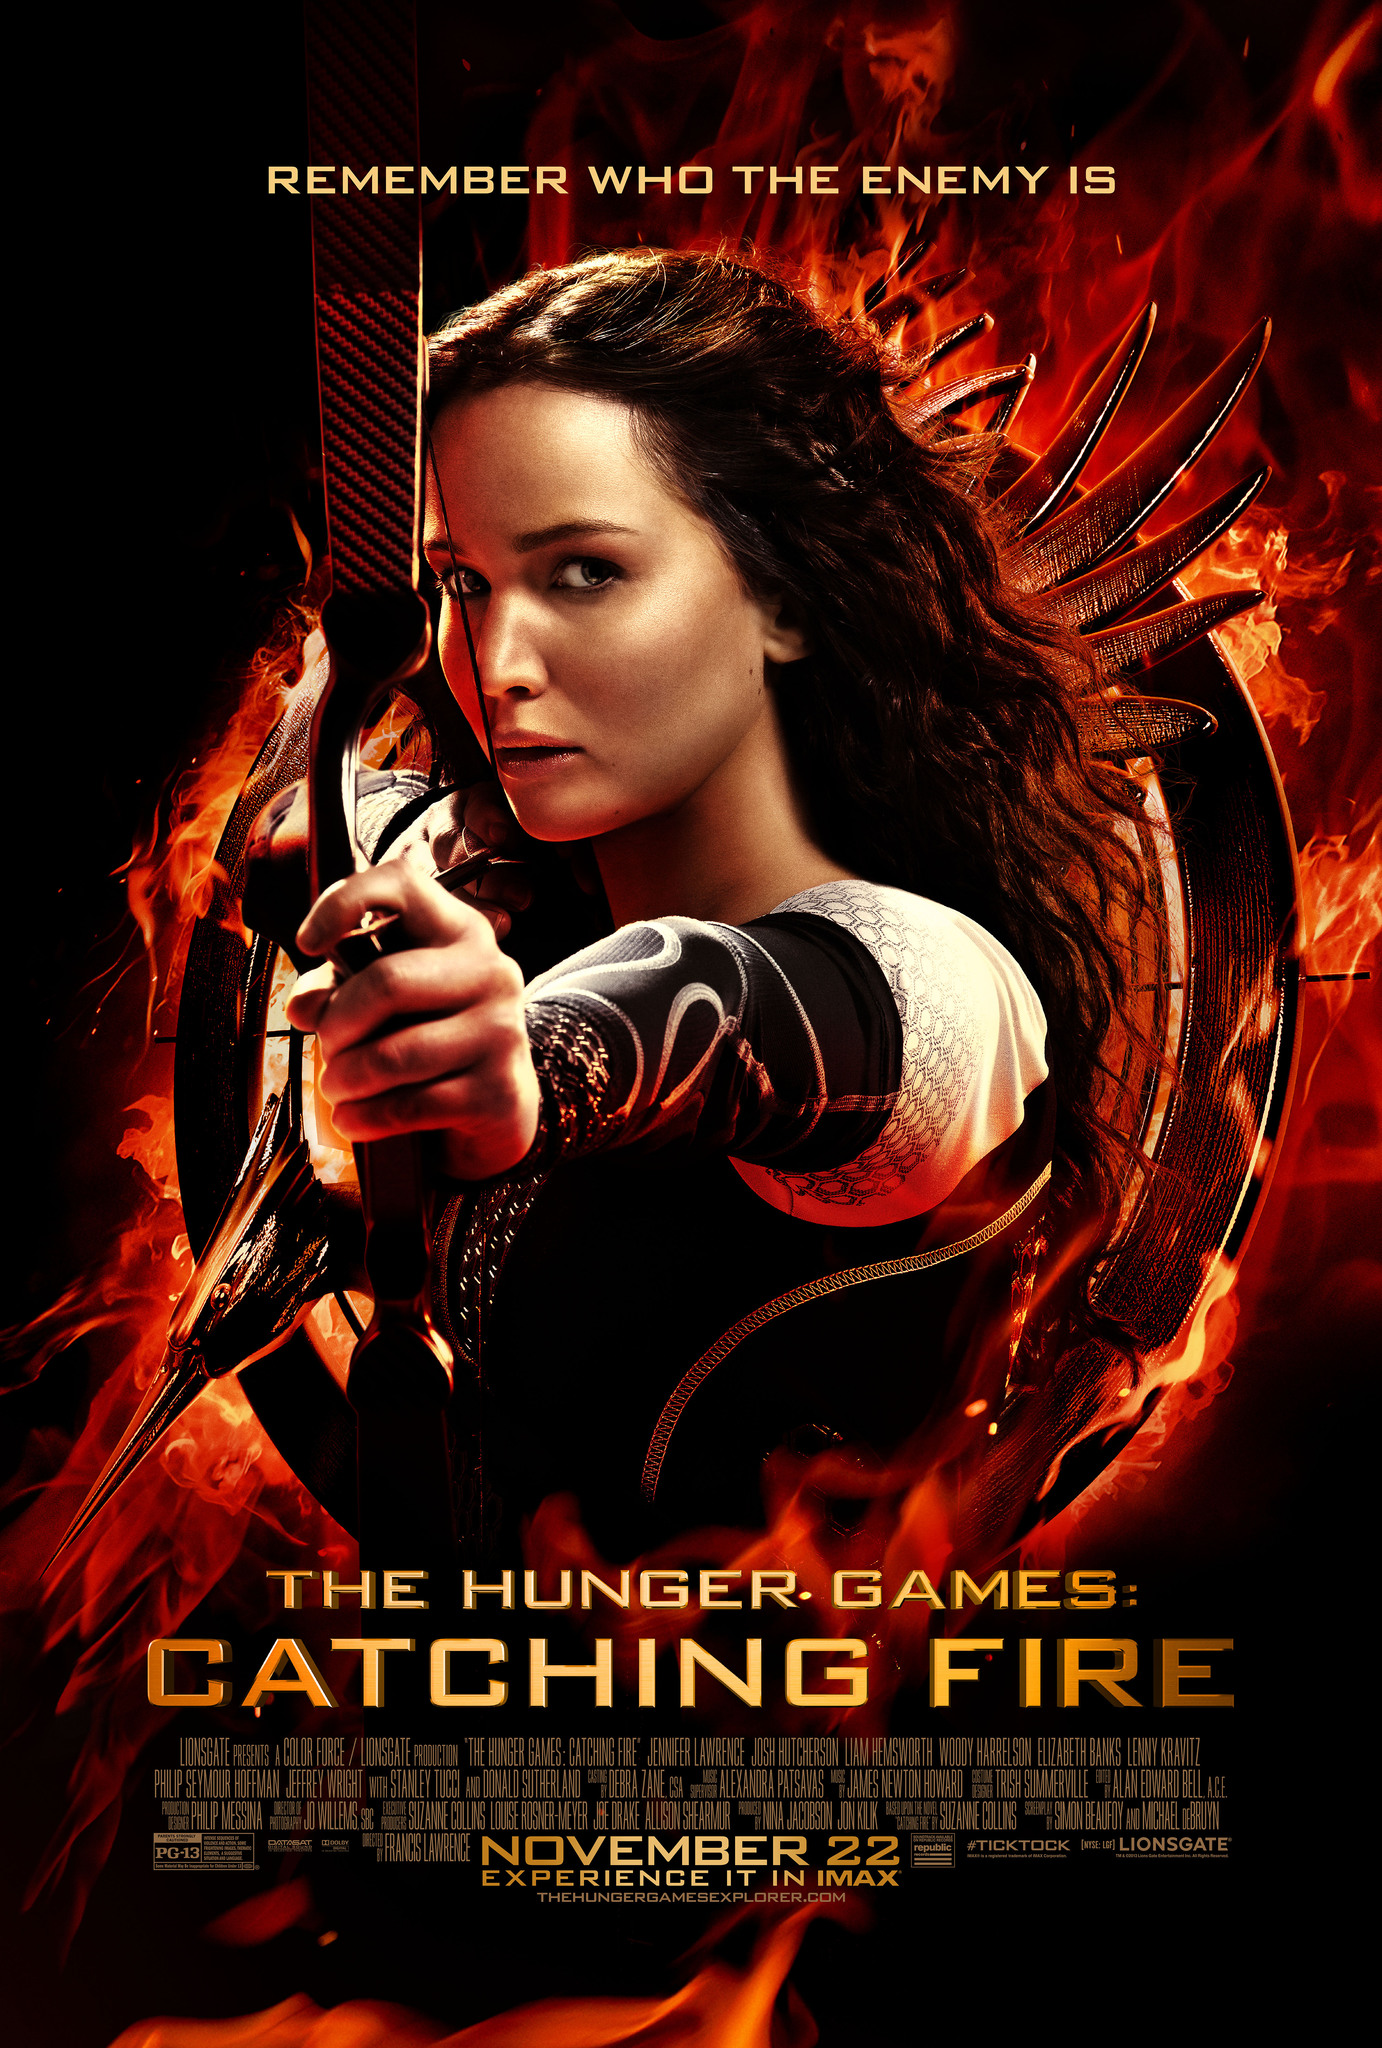 The Hunger Games: Catching Fire' Los Angeles premiere - Los Angeles Times